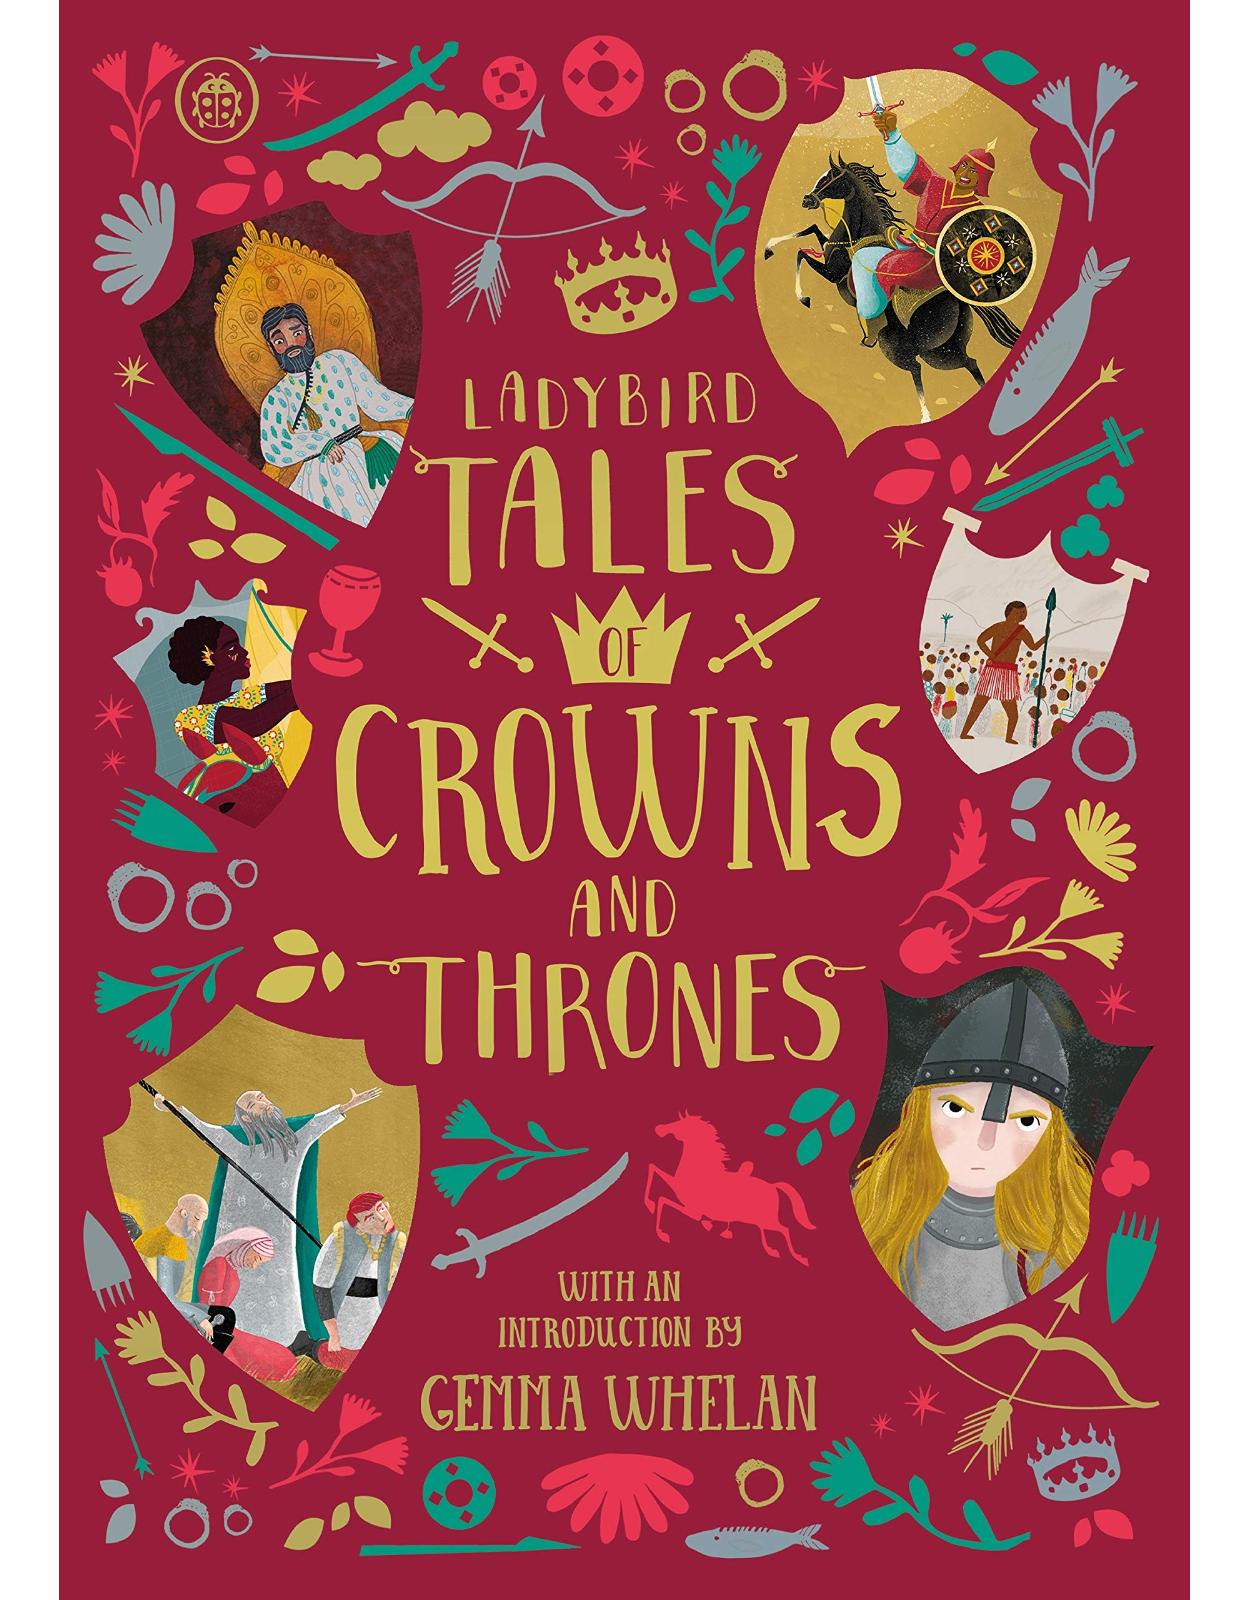 Ladybird Tales of Crowns and Thrones: With an Introduction From Gemma Whelan (Ladybird Tales of... Treasuries) 